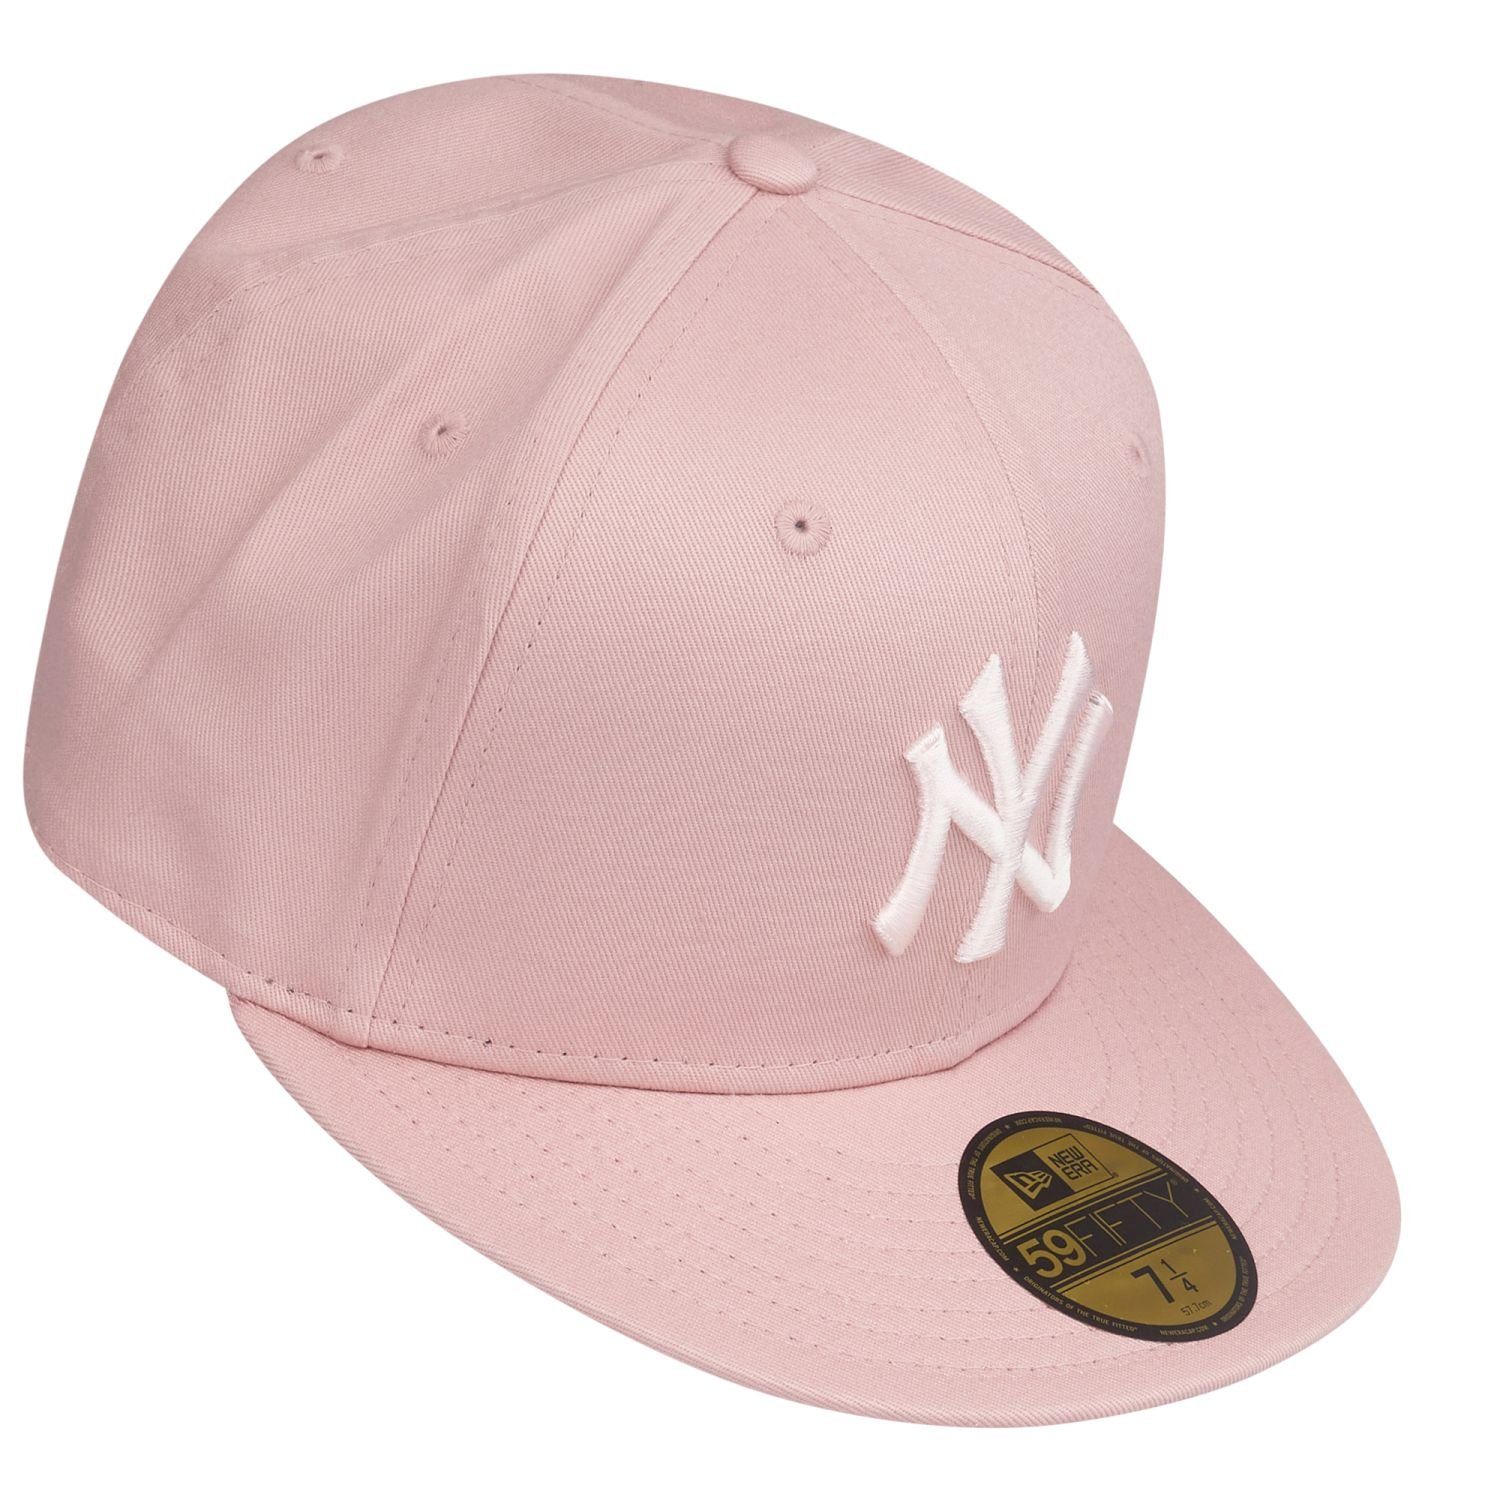 Cap York Fitted Yankees New New Era 59Fifty